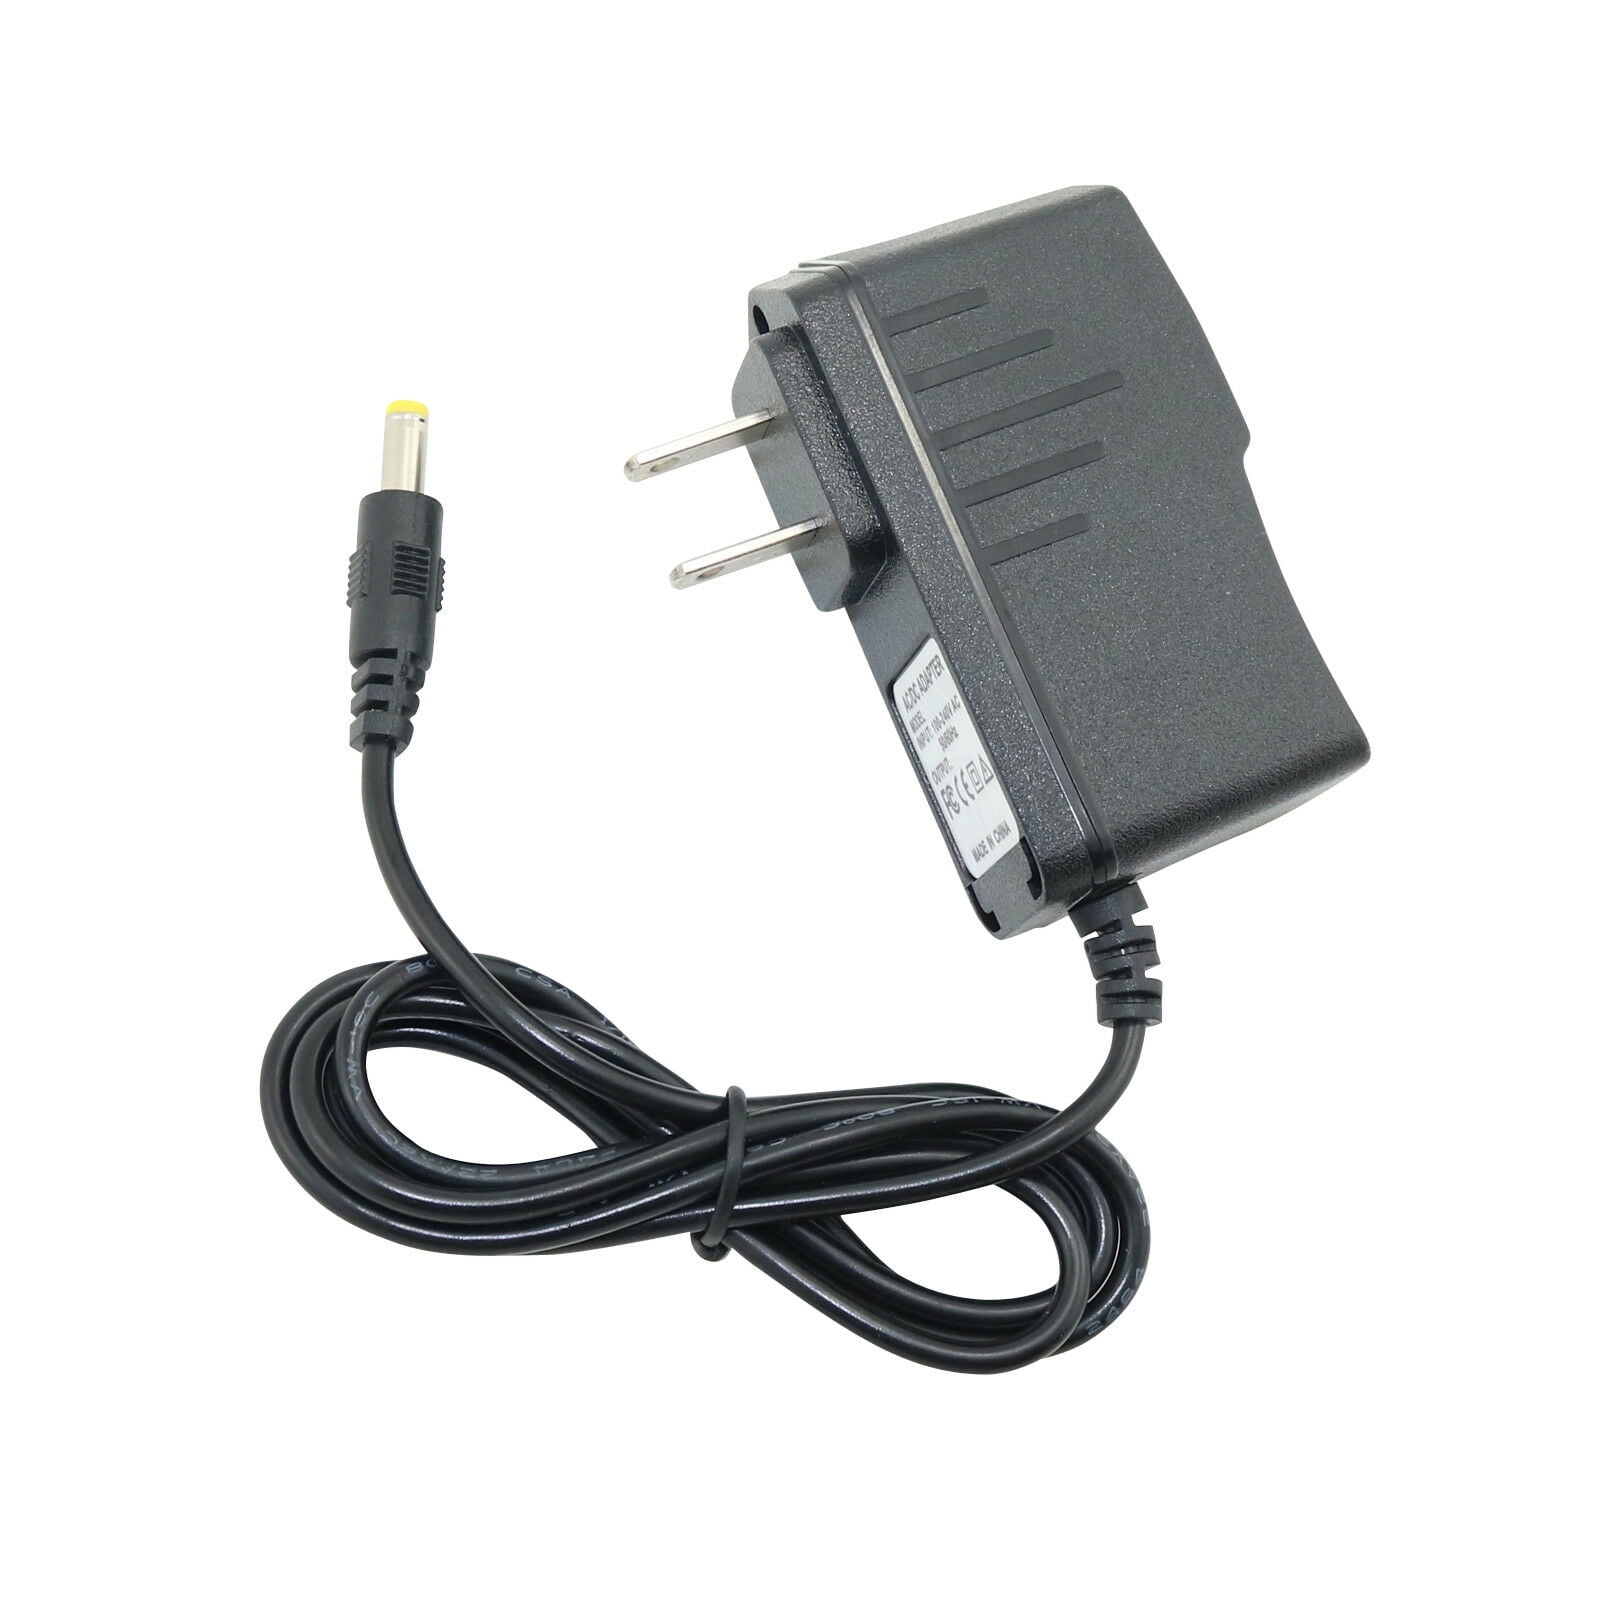 UL Listed AC Adapter For Omron 3/5/7/10 Series Blood Preasure Monitor HEM-ADPTW5 